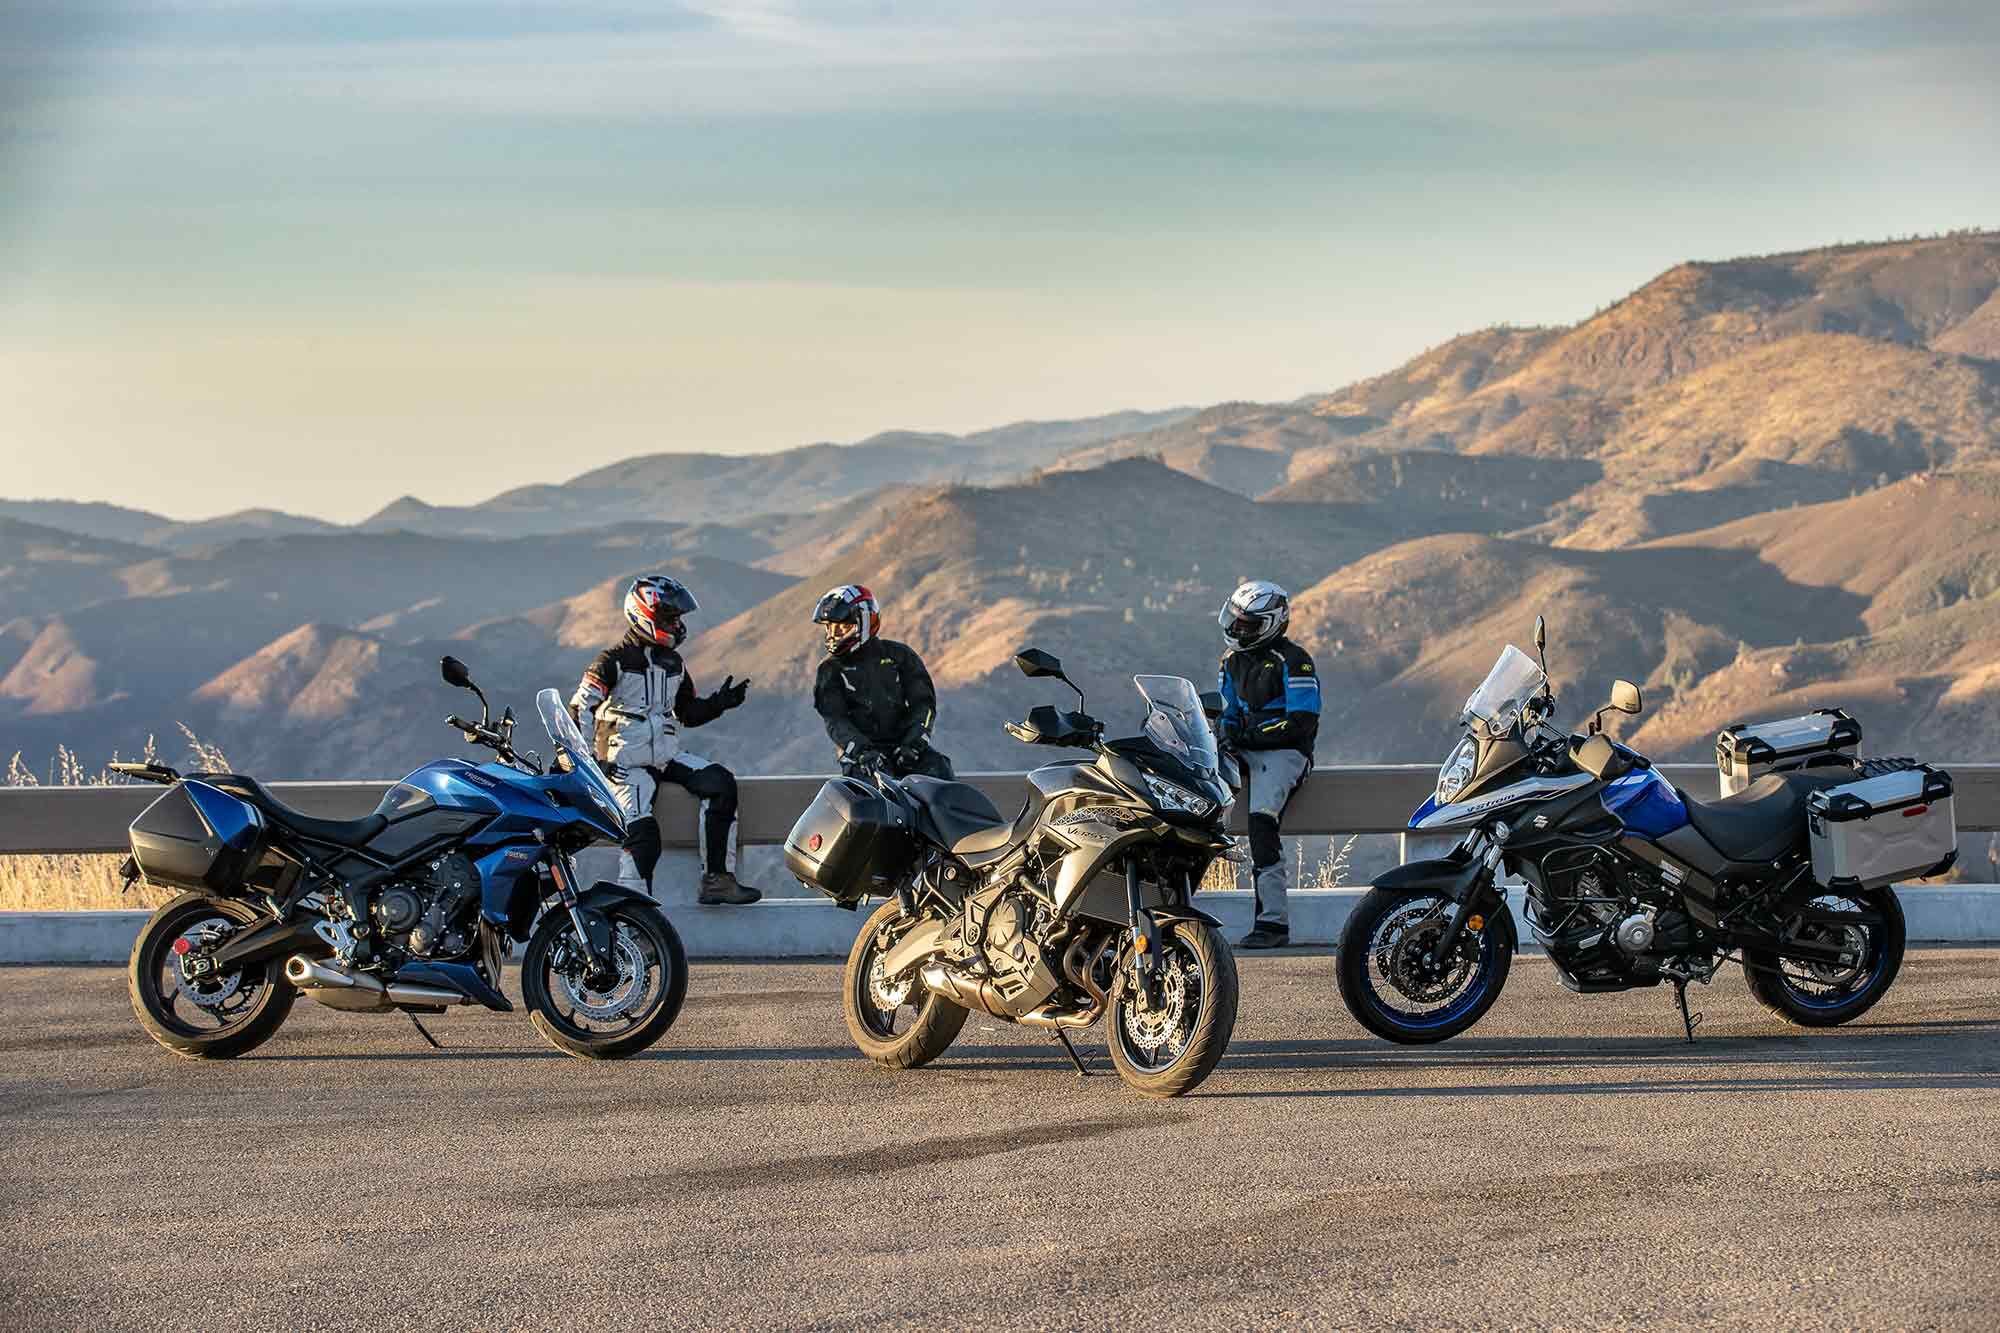 Kawasaki, Suzuki, and Triumph have all built great bikes for everything from commuting to weekend trips out of town.